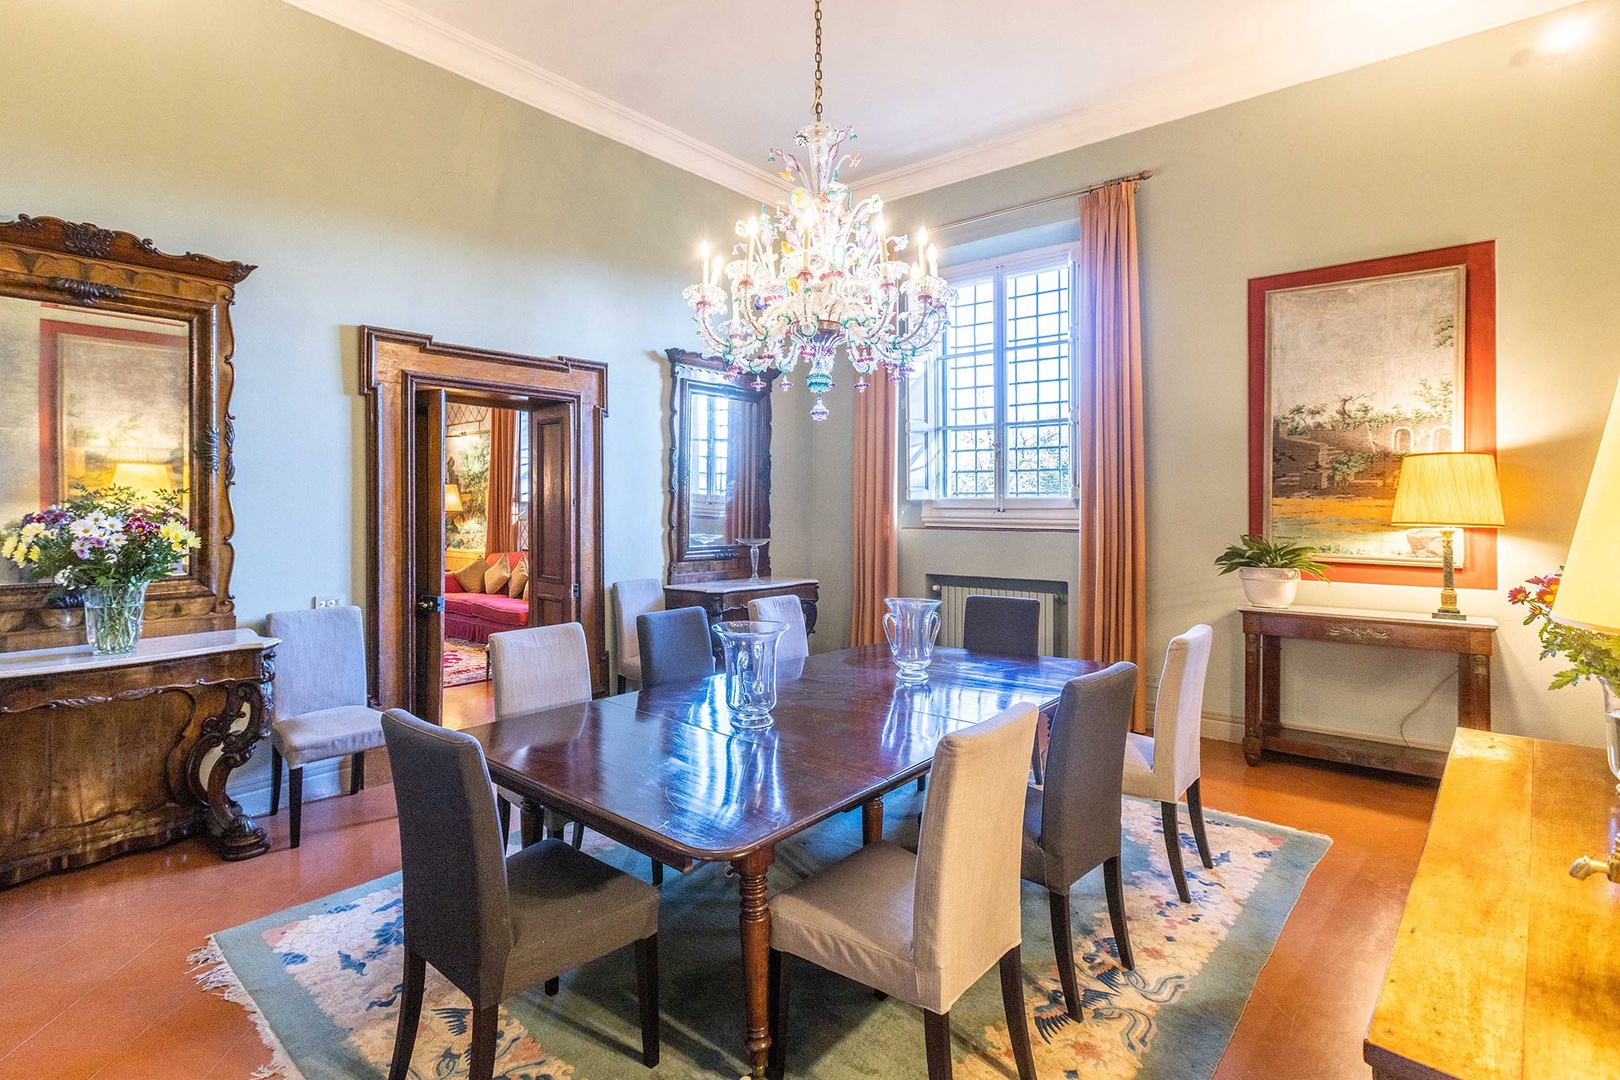 Dine in style in the elegant dining room with gorgeous Venetian glass chandelier.